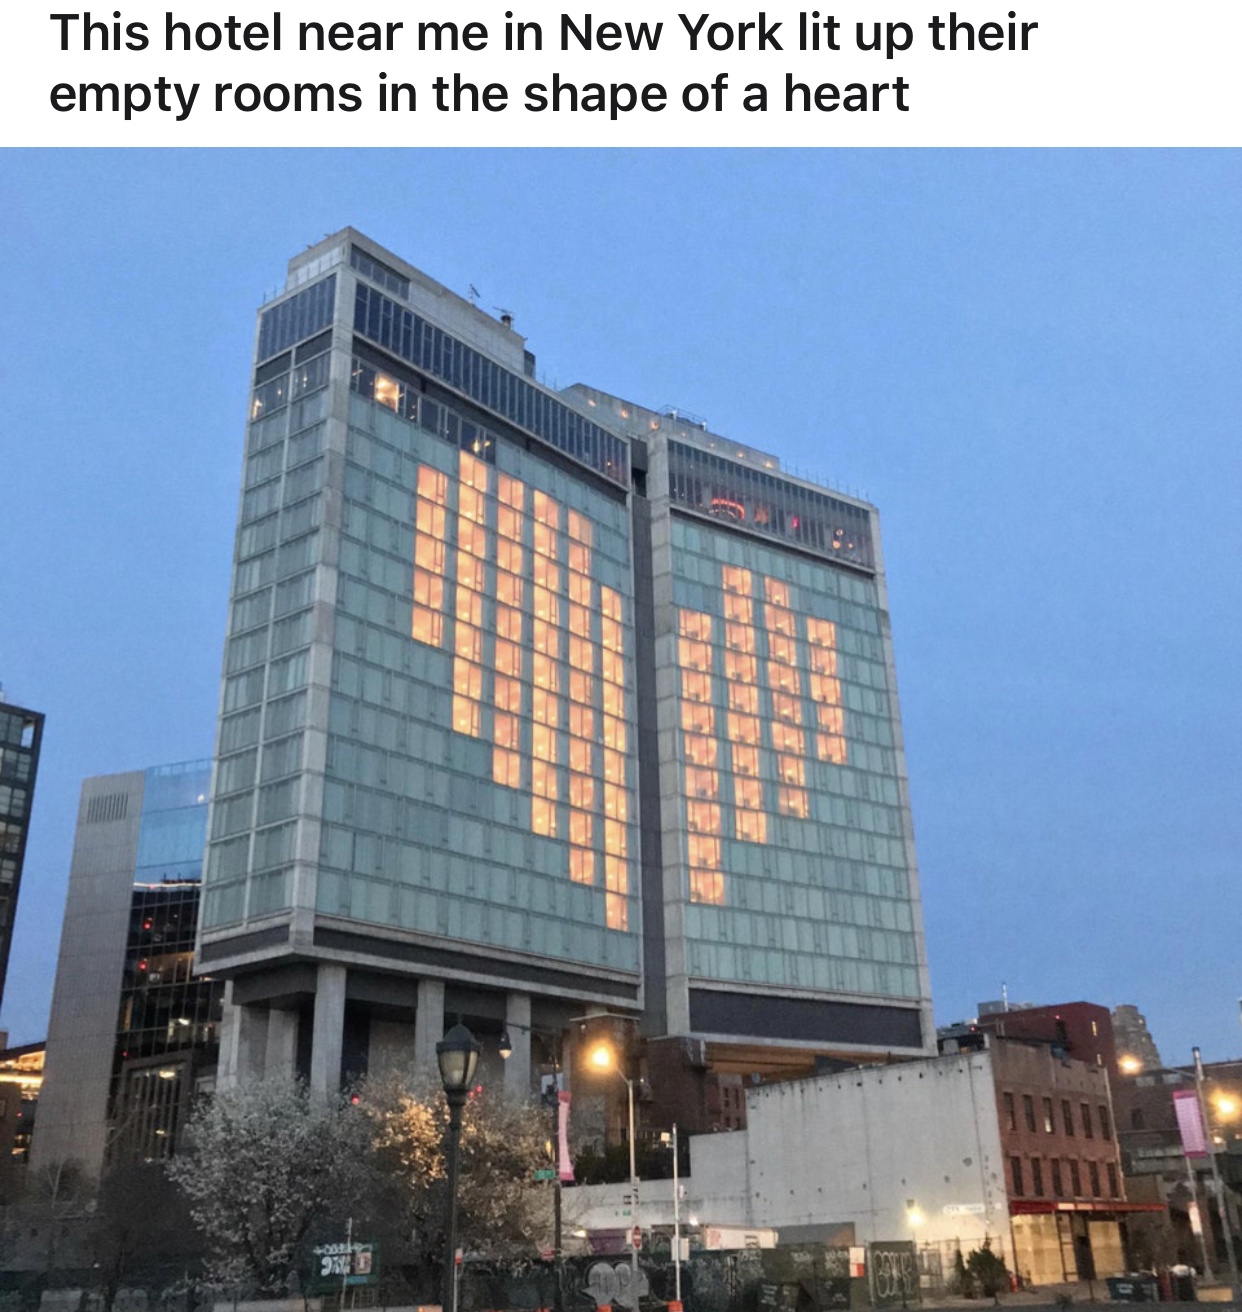 commercial building - This hotel near me in New York lit up their empty rooms in the shape of a heart Erry